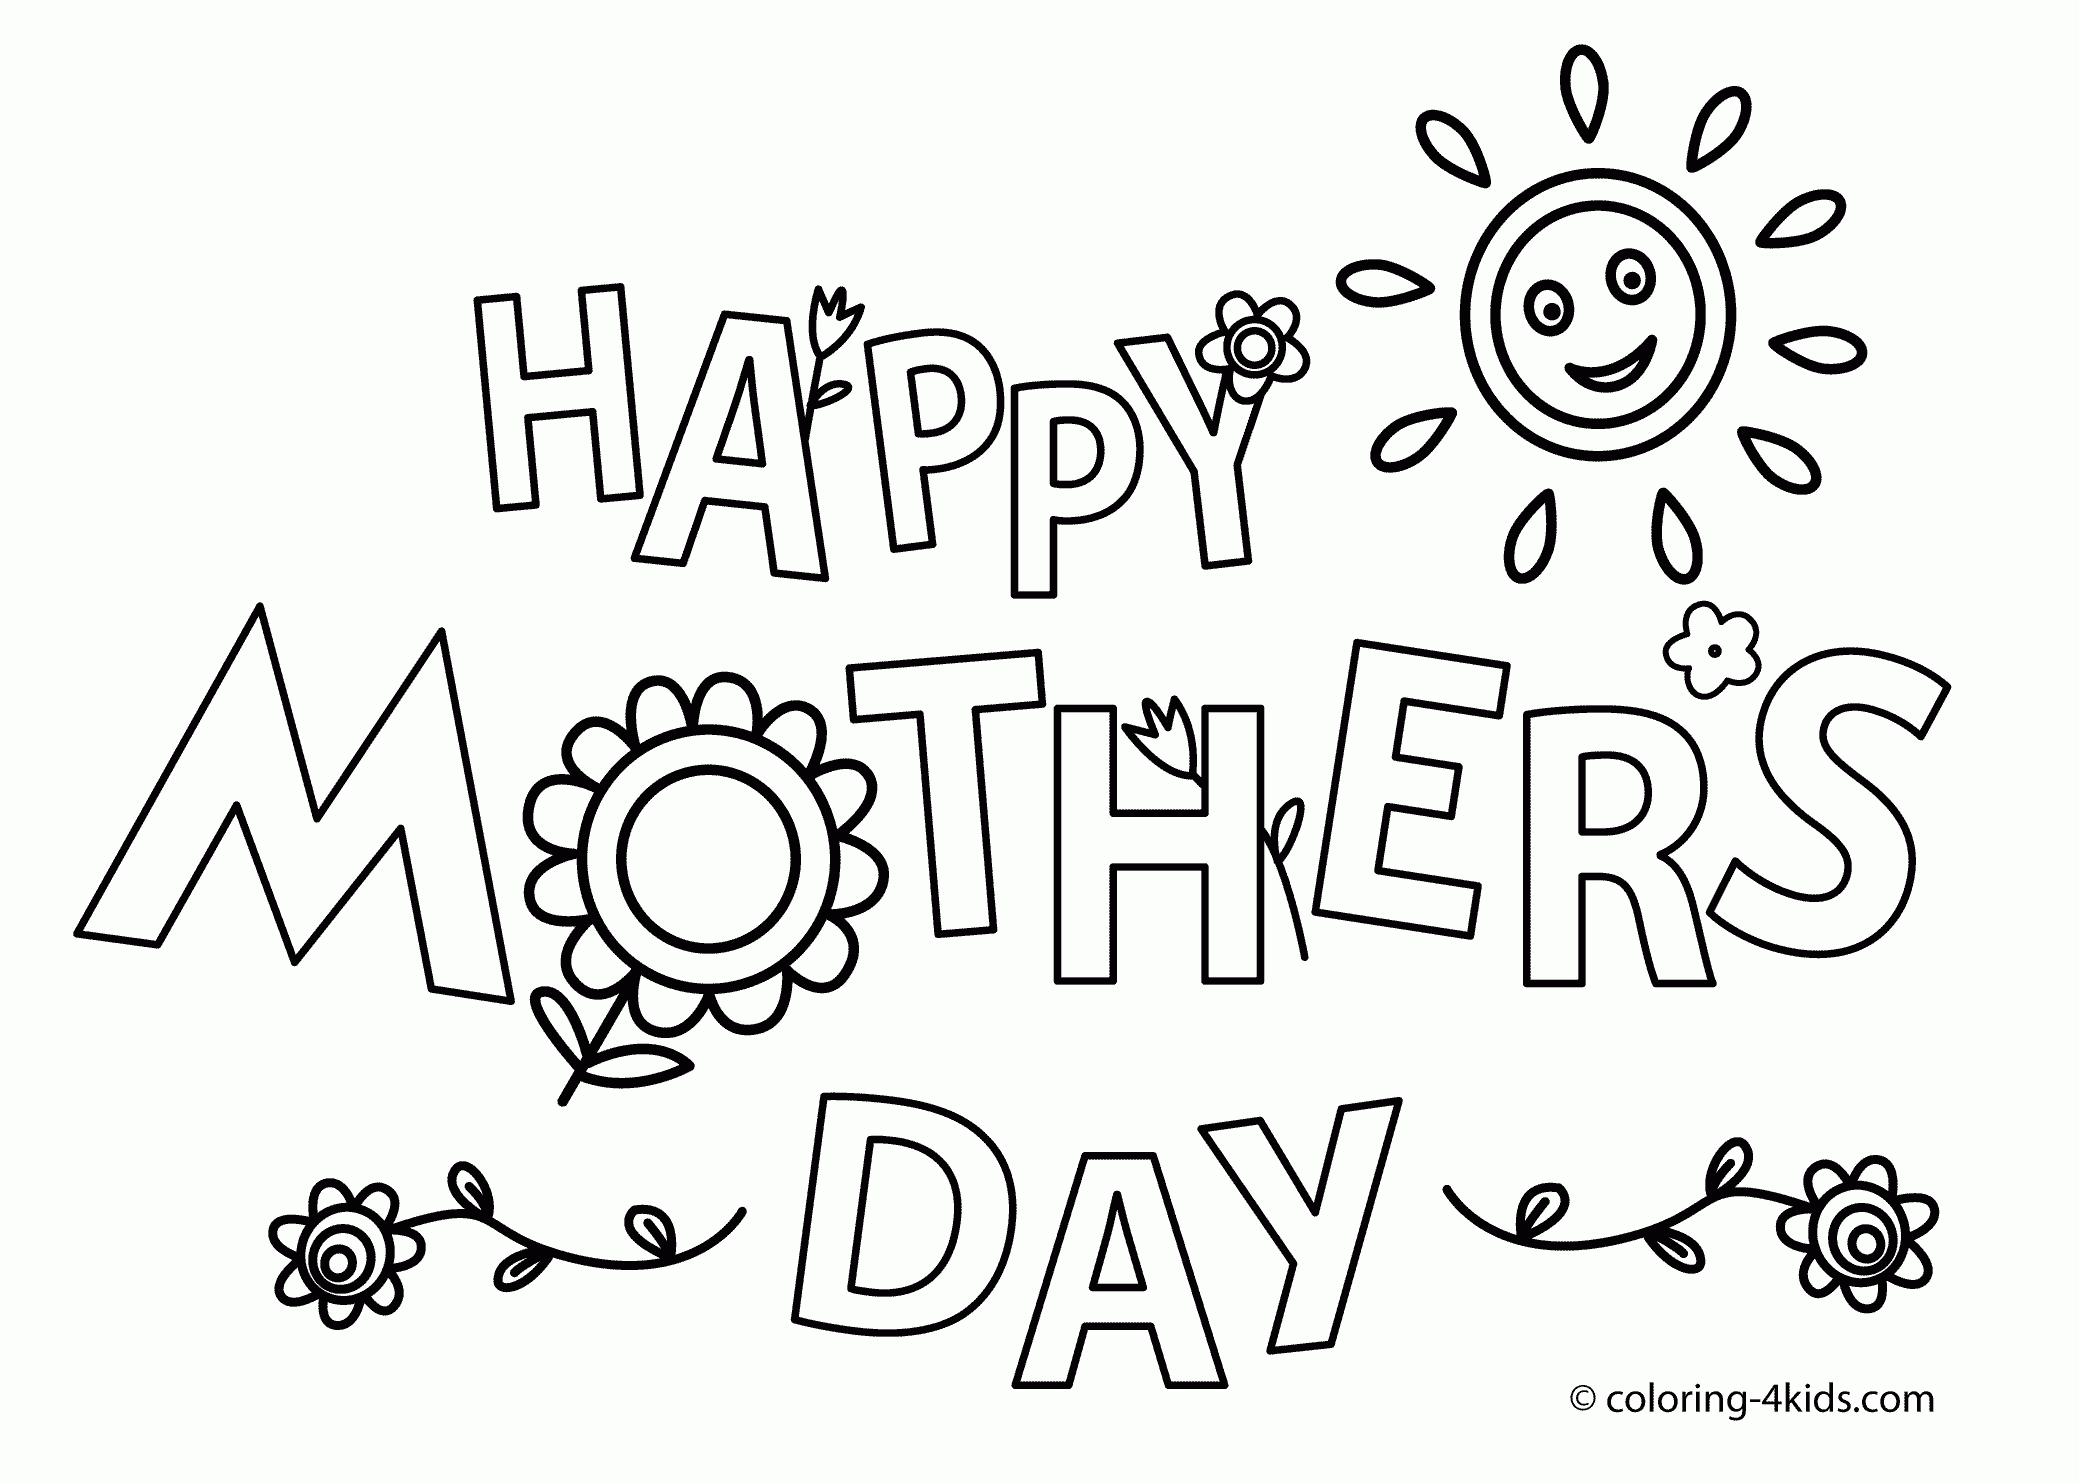 Free Printable Mothers Day Coloring Pages - Free Printable Calendar - Free Printable Mothers Day Coloring Pages